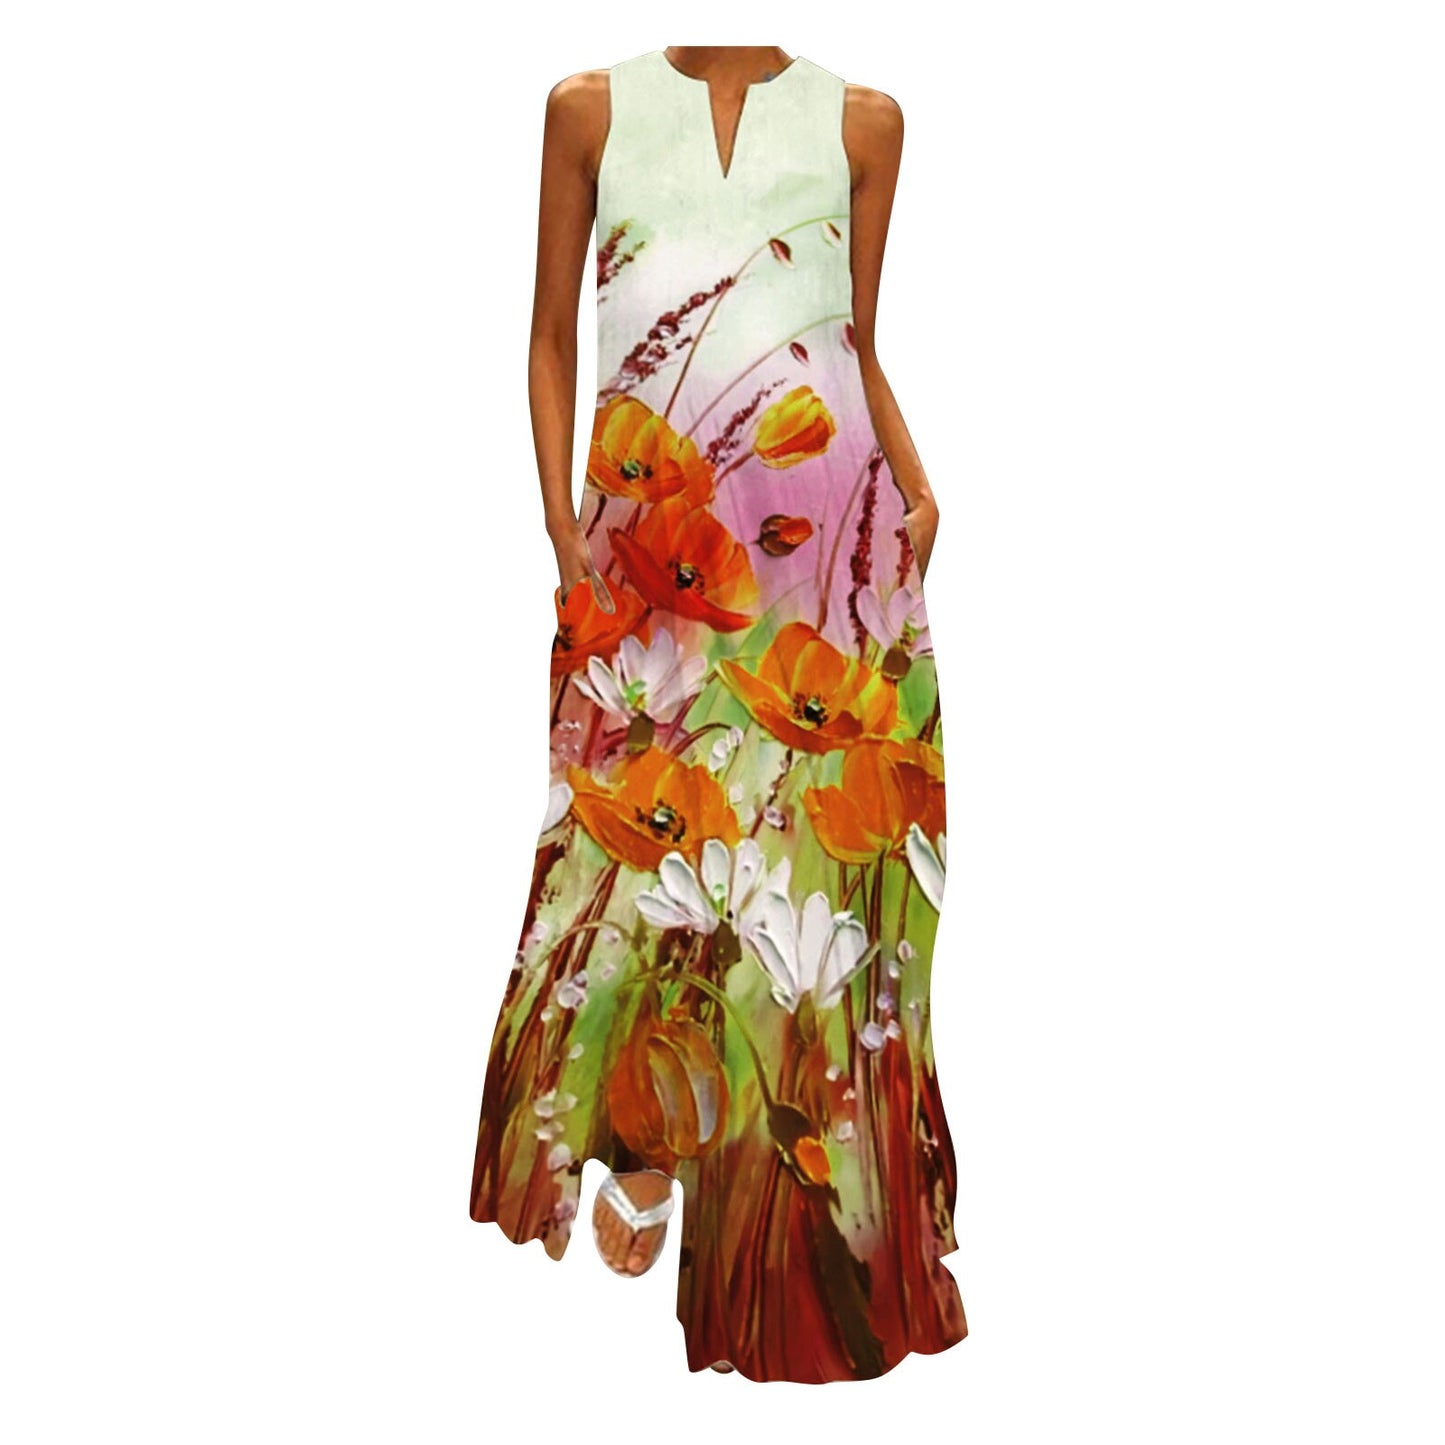 Women Sleeveless Floral Print V-neck Maxi Dress Summer Party Wear Evening Party Dresses Plus Size Casual Loose Robes Vestidos